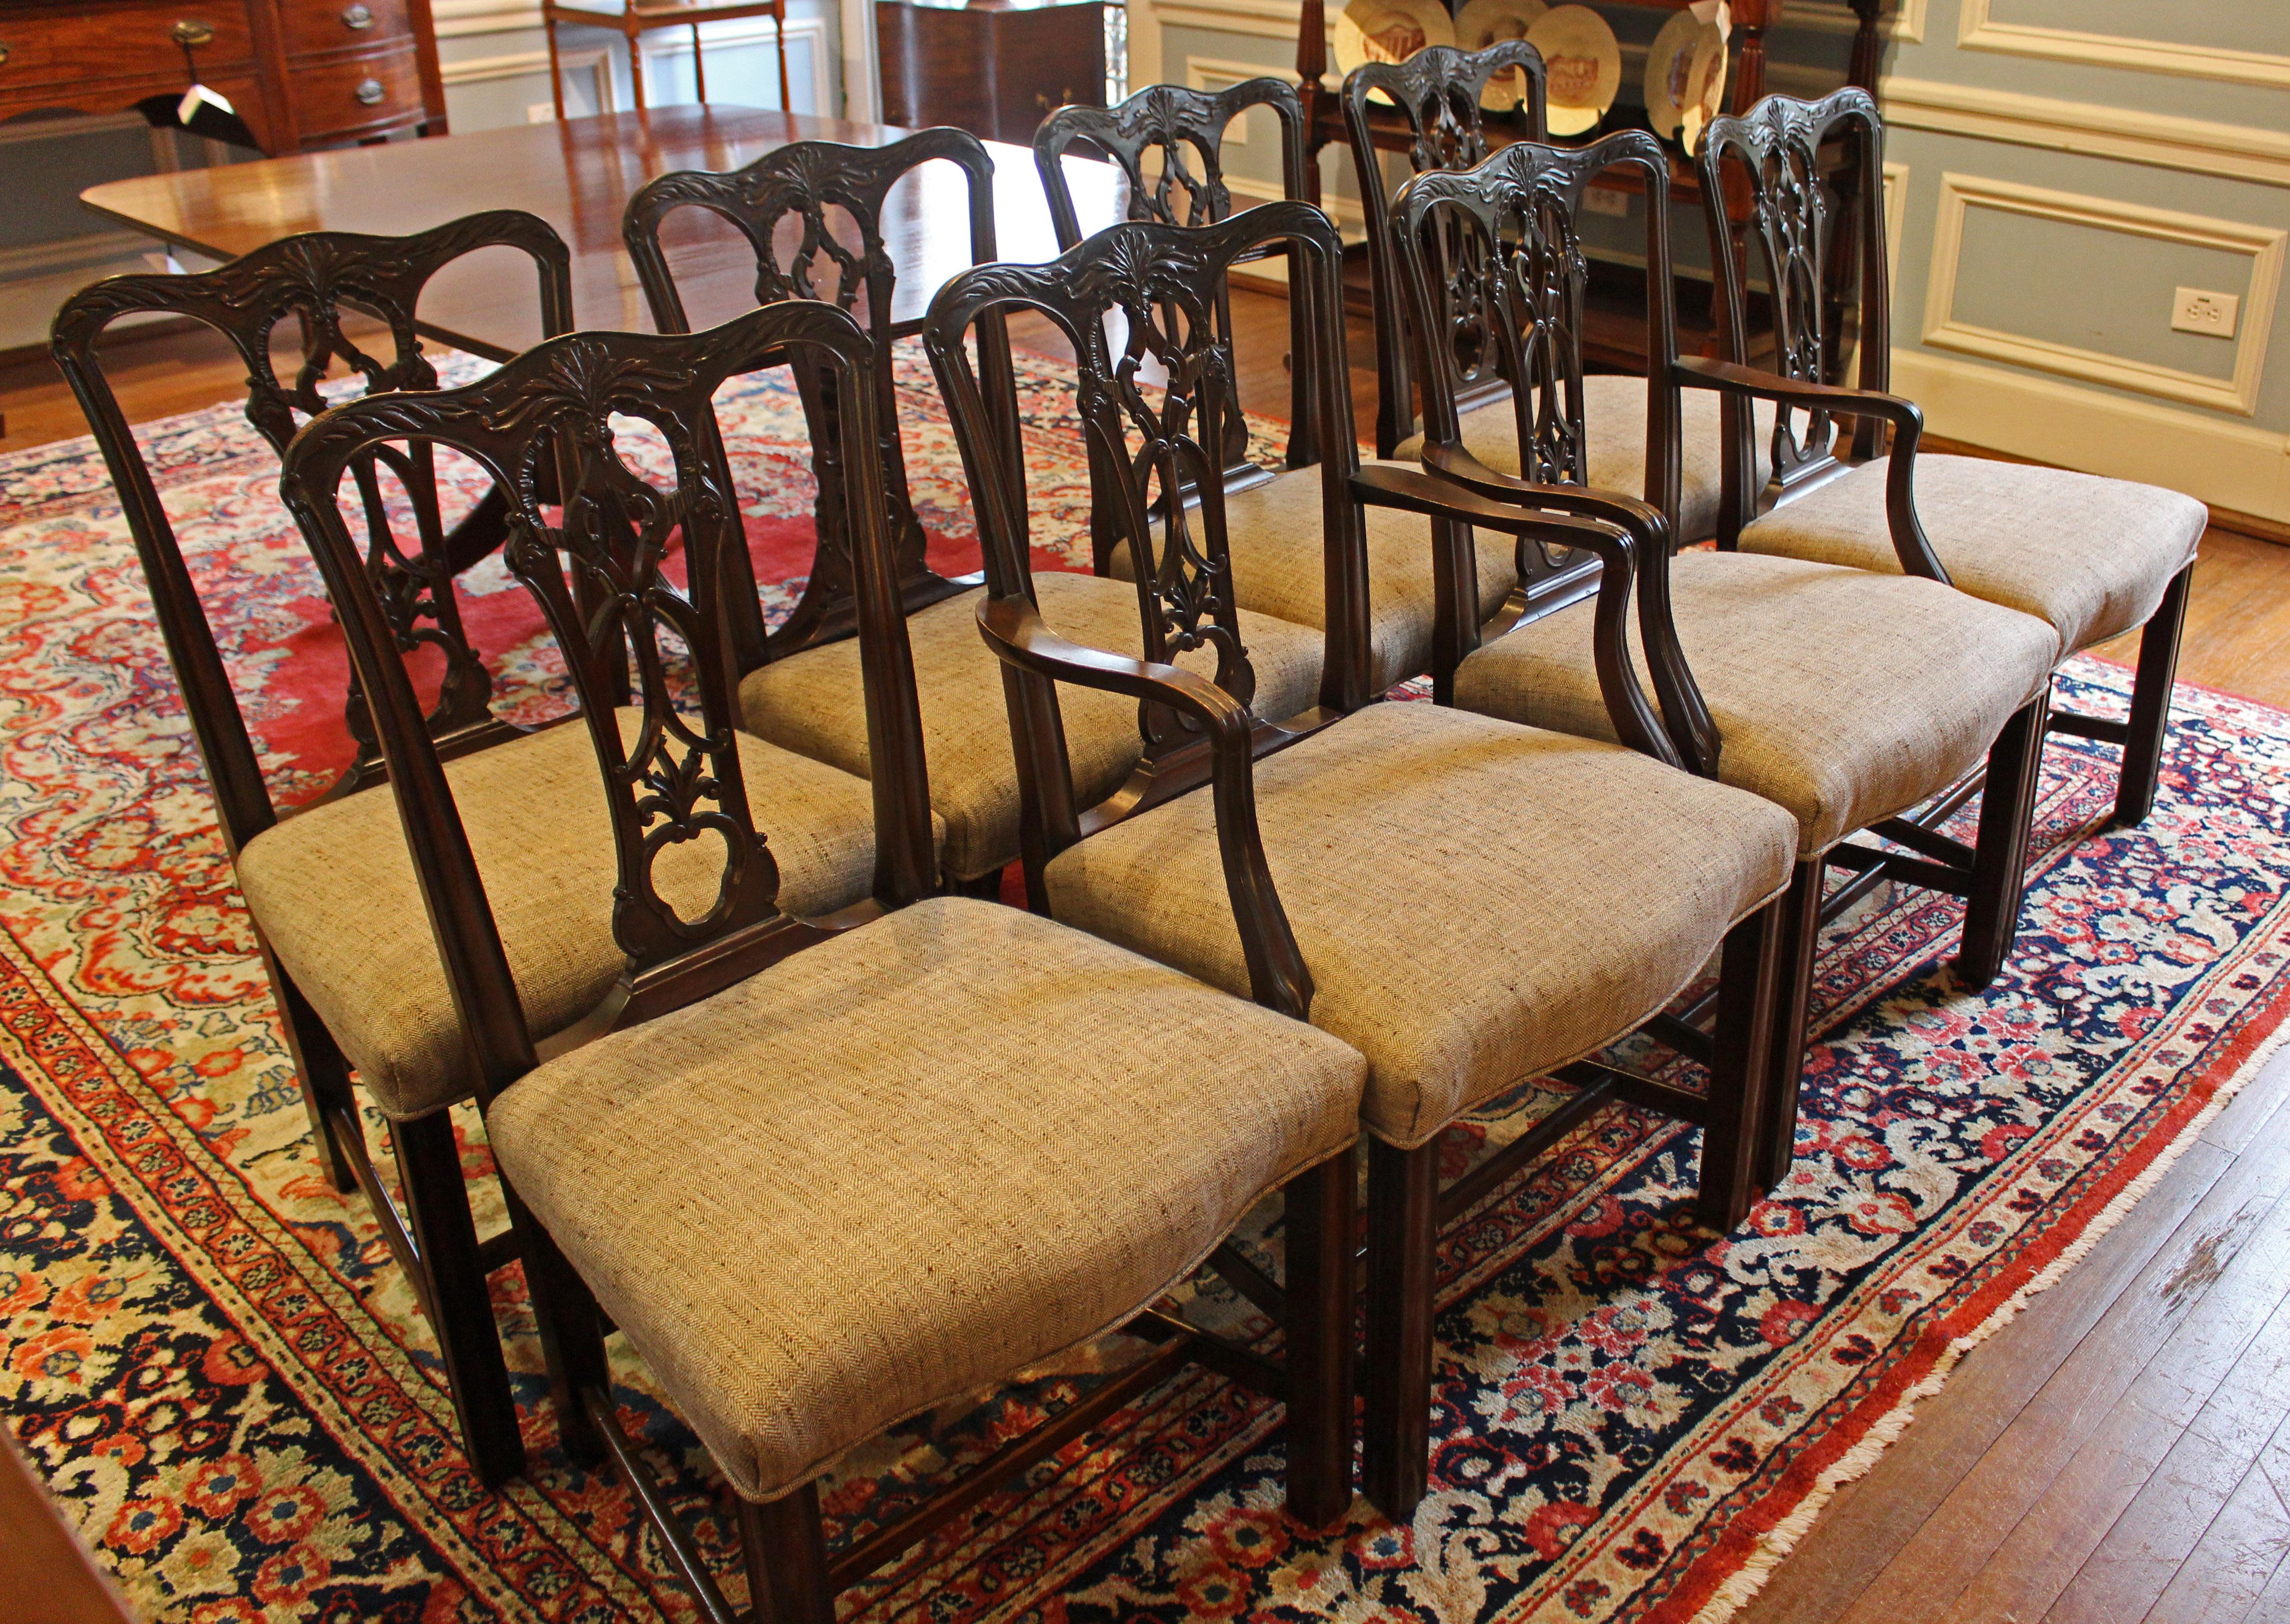 Mid-19th century set of 8 dining chairs in the resurging Chippendale Gothic taste of the time. 2 arms & 6 sides. Fine mahogany. Exceptionally well carved backsplats & crest rails with acanthus leaves and Gothic scrolls. Shaped, molded arms. Shaped